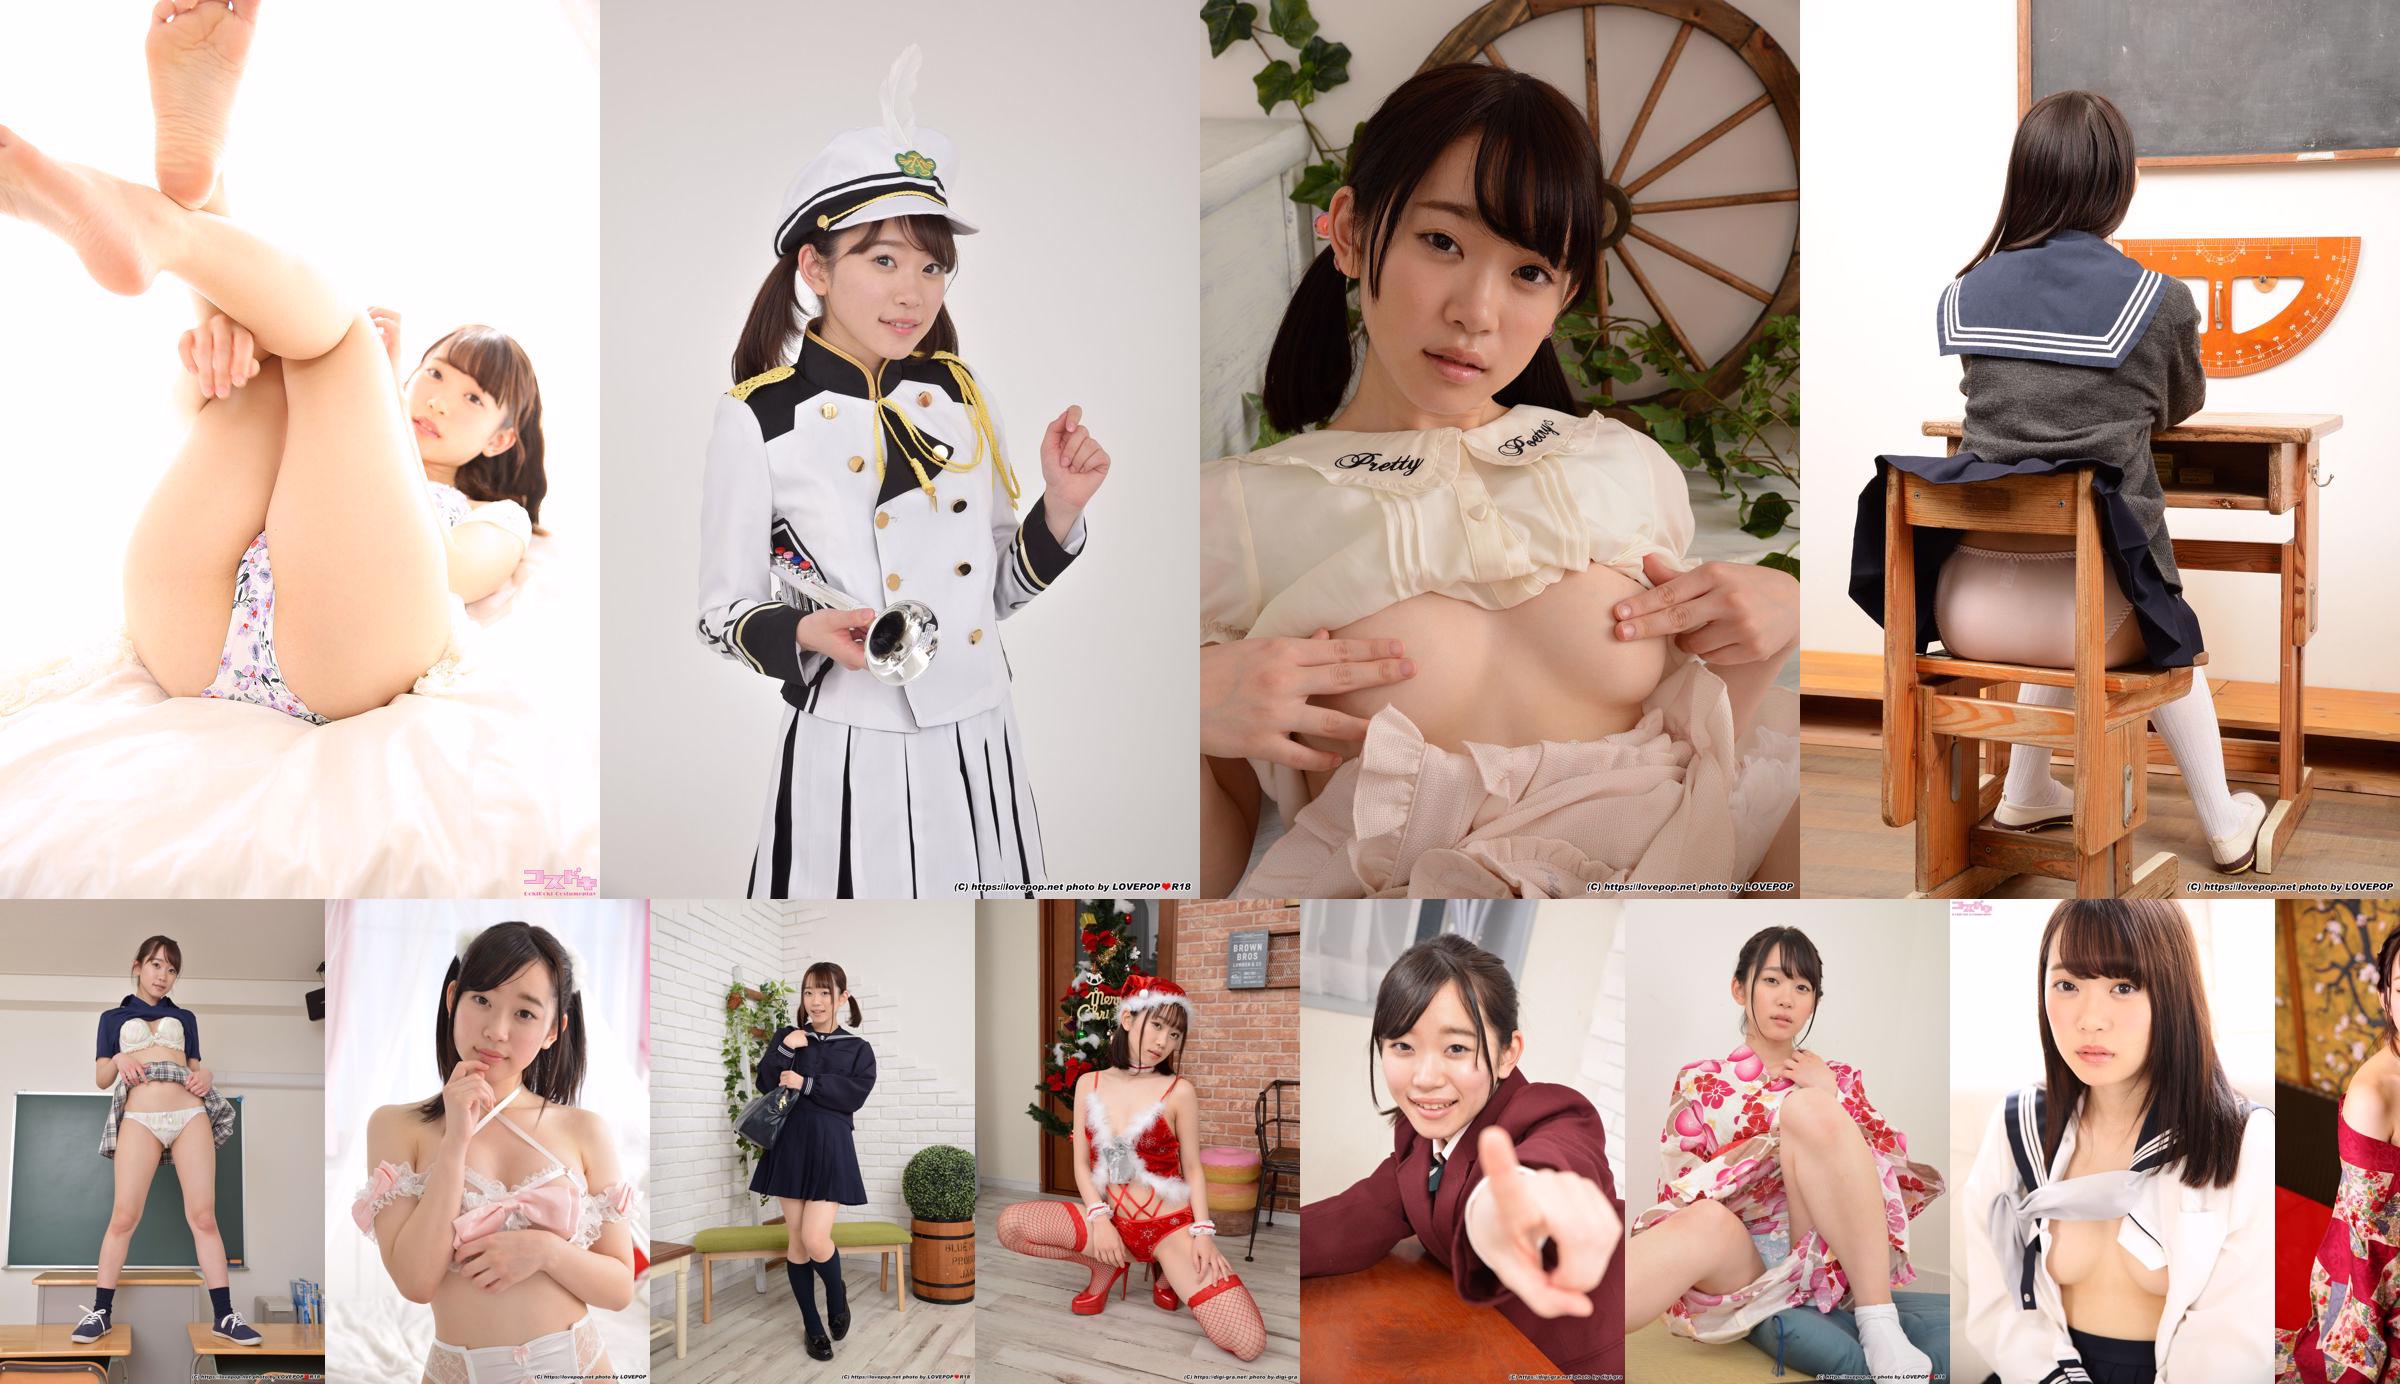 [LOVEPOP] Special Maid Collection - Yura Kano ゆら ชุดรูปถ่าย 02 No.a907d5 หน้า 1